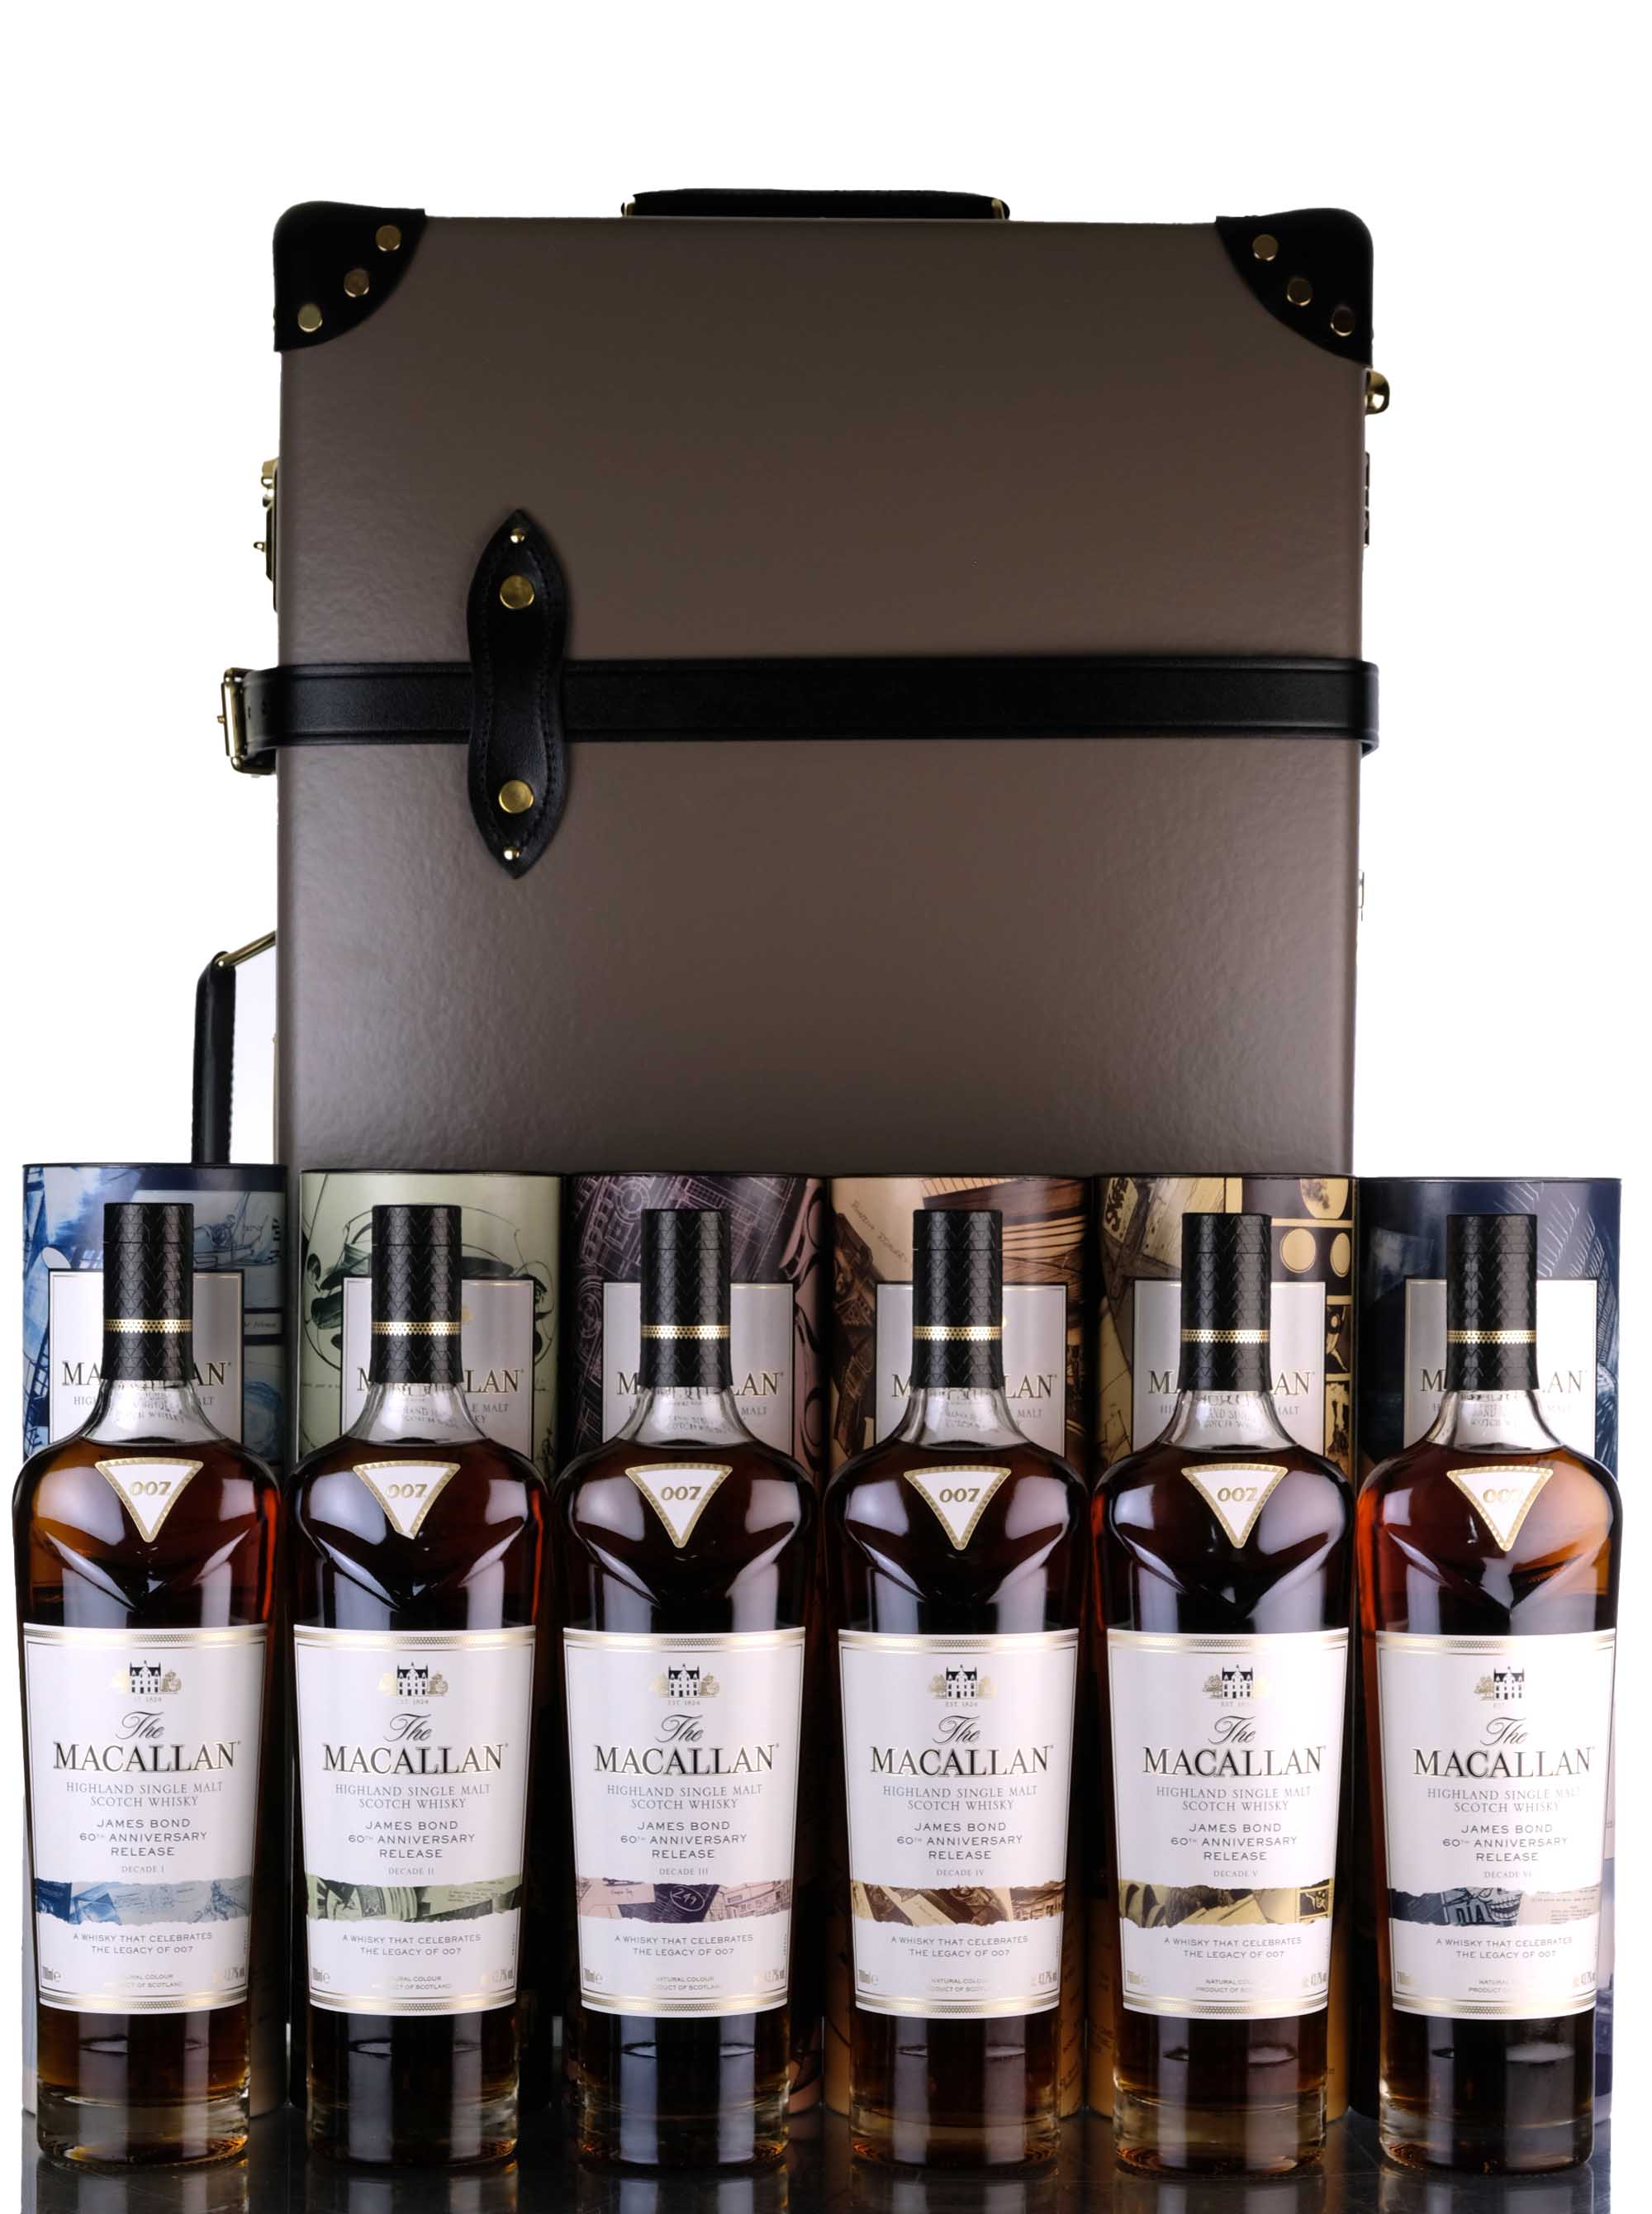 Macallan James Bond 007 60th Anniversary Release - Decade 1-6 - Globe Trotter Edition With